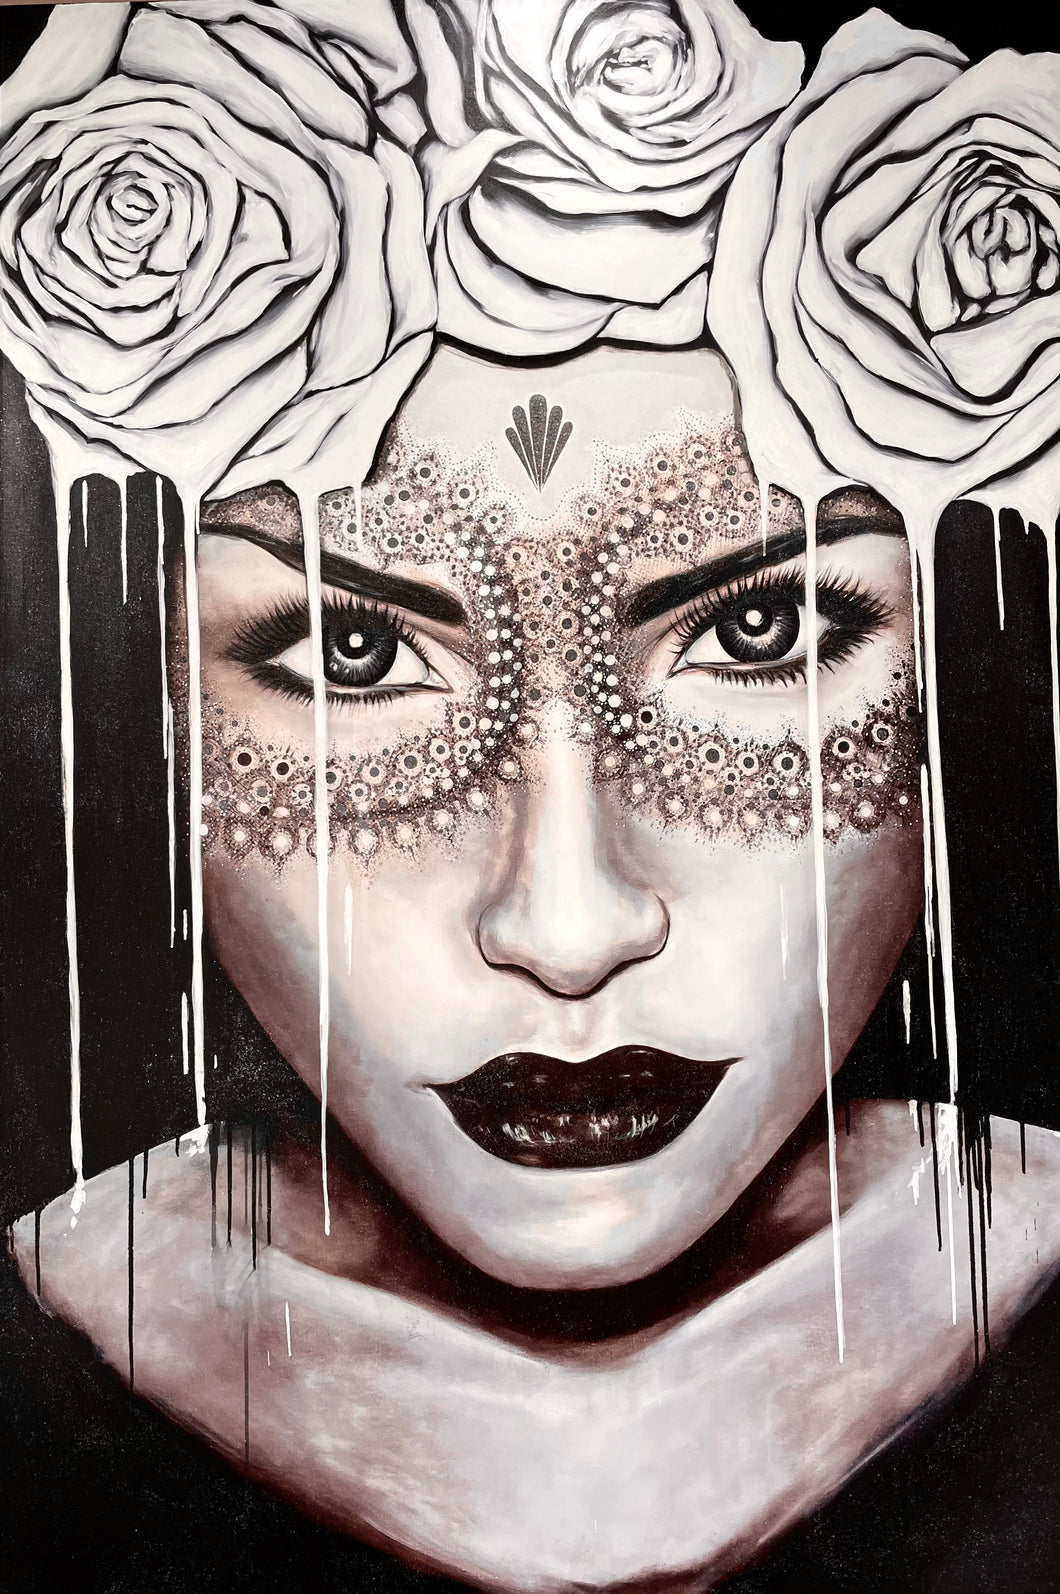 White Fuego - Portrait of girl with intense stare in a crown of white roses and detailed lace mask. Painted on a large scale 1.9x1.4m stretched canvas with sepia tones. Inspired by the gatsby era and lifestyle during the Art Deco movement of the 1920's.